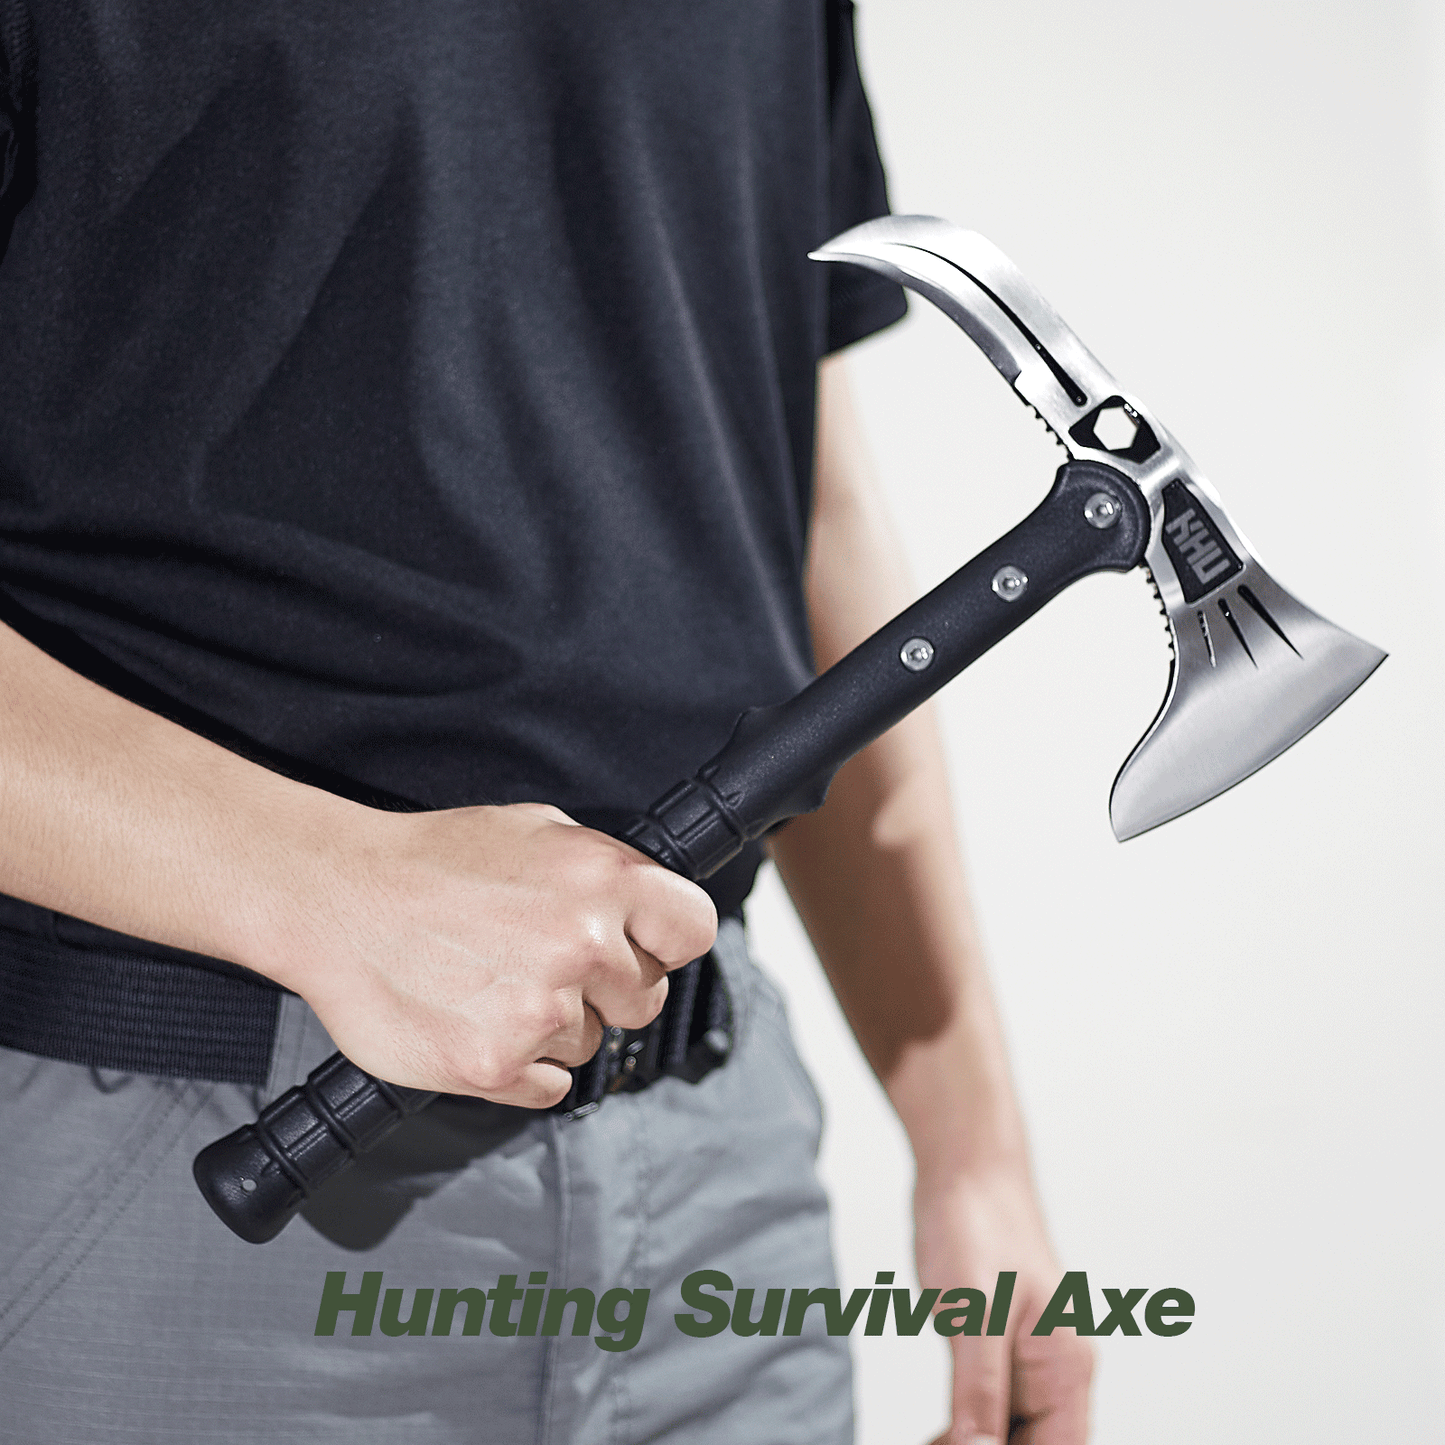 KHU Camping Axe Tactical Throwing Axe Tomahawk Survival Hatchet Axe with Sheath - Nylon Fiber Handle for Outdoor Hunting Hiking Camping Gear